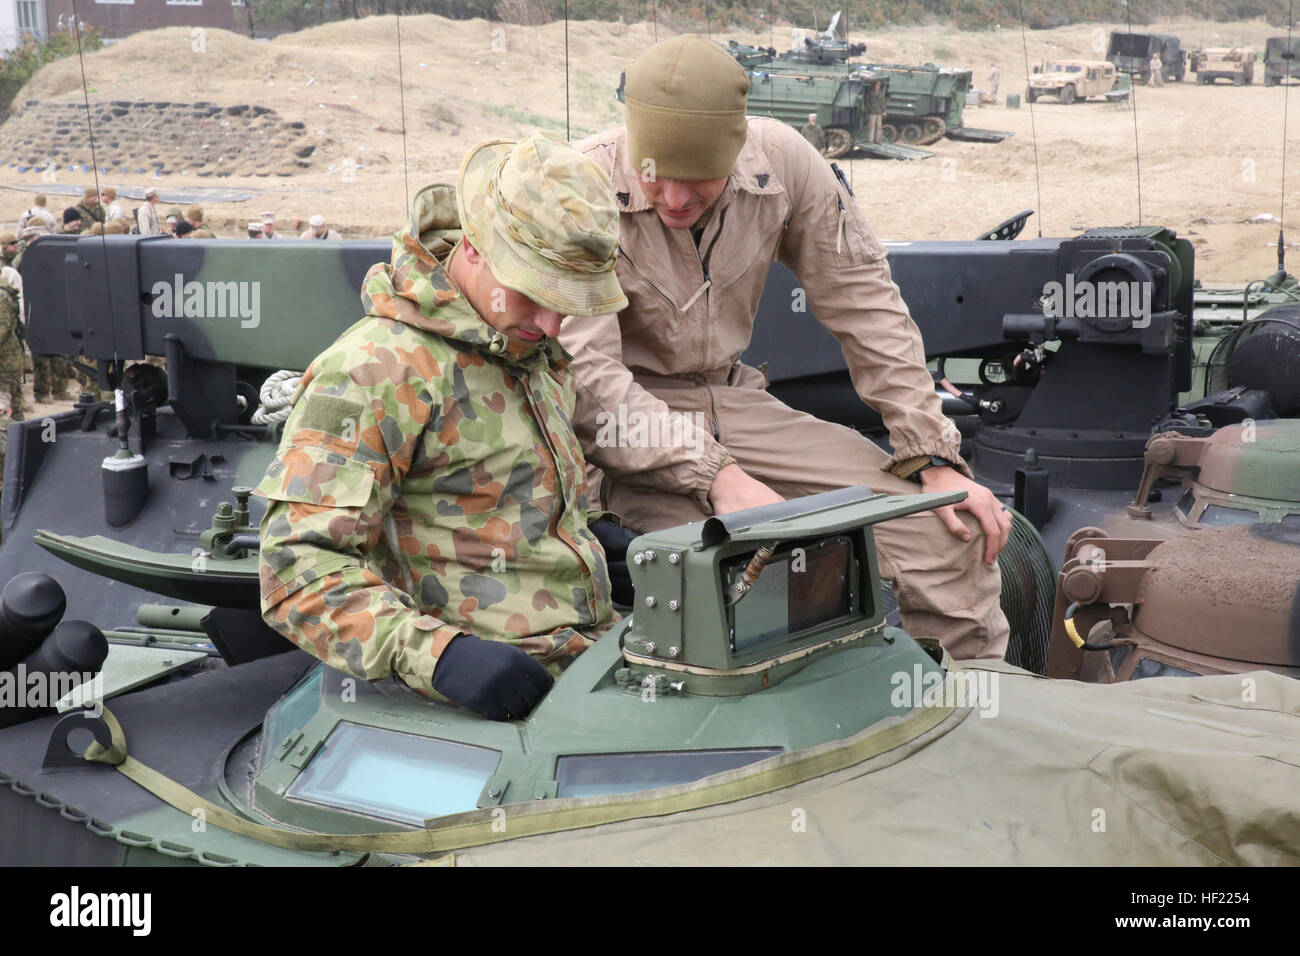 U.S. Marine Cpl. Kyle Eaton, right, shows Australian Army Pvt. Ted Hanlon controls in the turret of an amphibious assault vehicle during exercise Ssang Yong 2014 March 30 in Dogue, Republic of Korea. Ssang Yong 14 is a combined amphibious exercise, incorporating more than 13,000 U.S. and ROK Navy-Marine and Australian Army forces, which effectively demonstrates the unique abilities of a forward-deployed Marine air-ground task force. Hanlon is an infantryman with Company B, 6th Battalion, Royal Australian Regiment. Eaton is an amphibious assault vehicle crewman with 3rd Assault Amphibian Battal Stock Photo